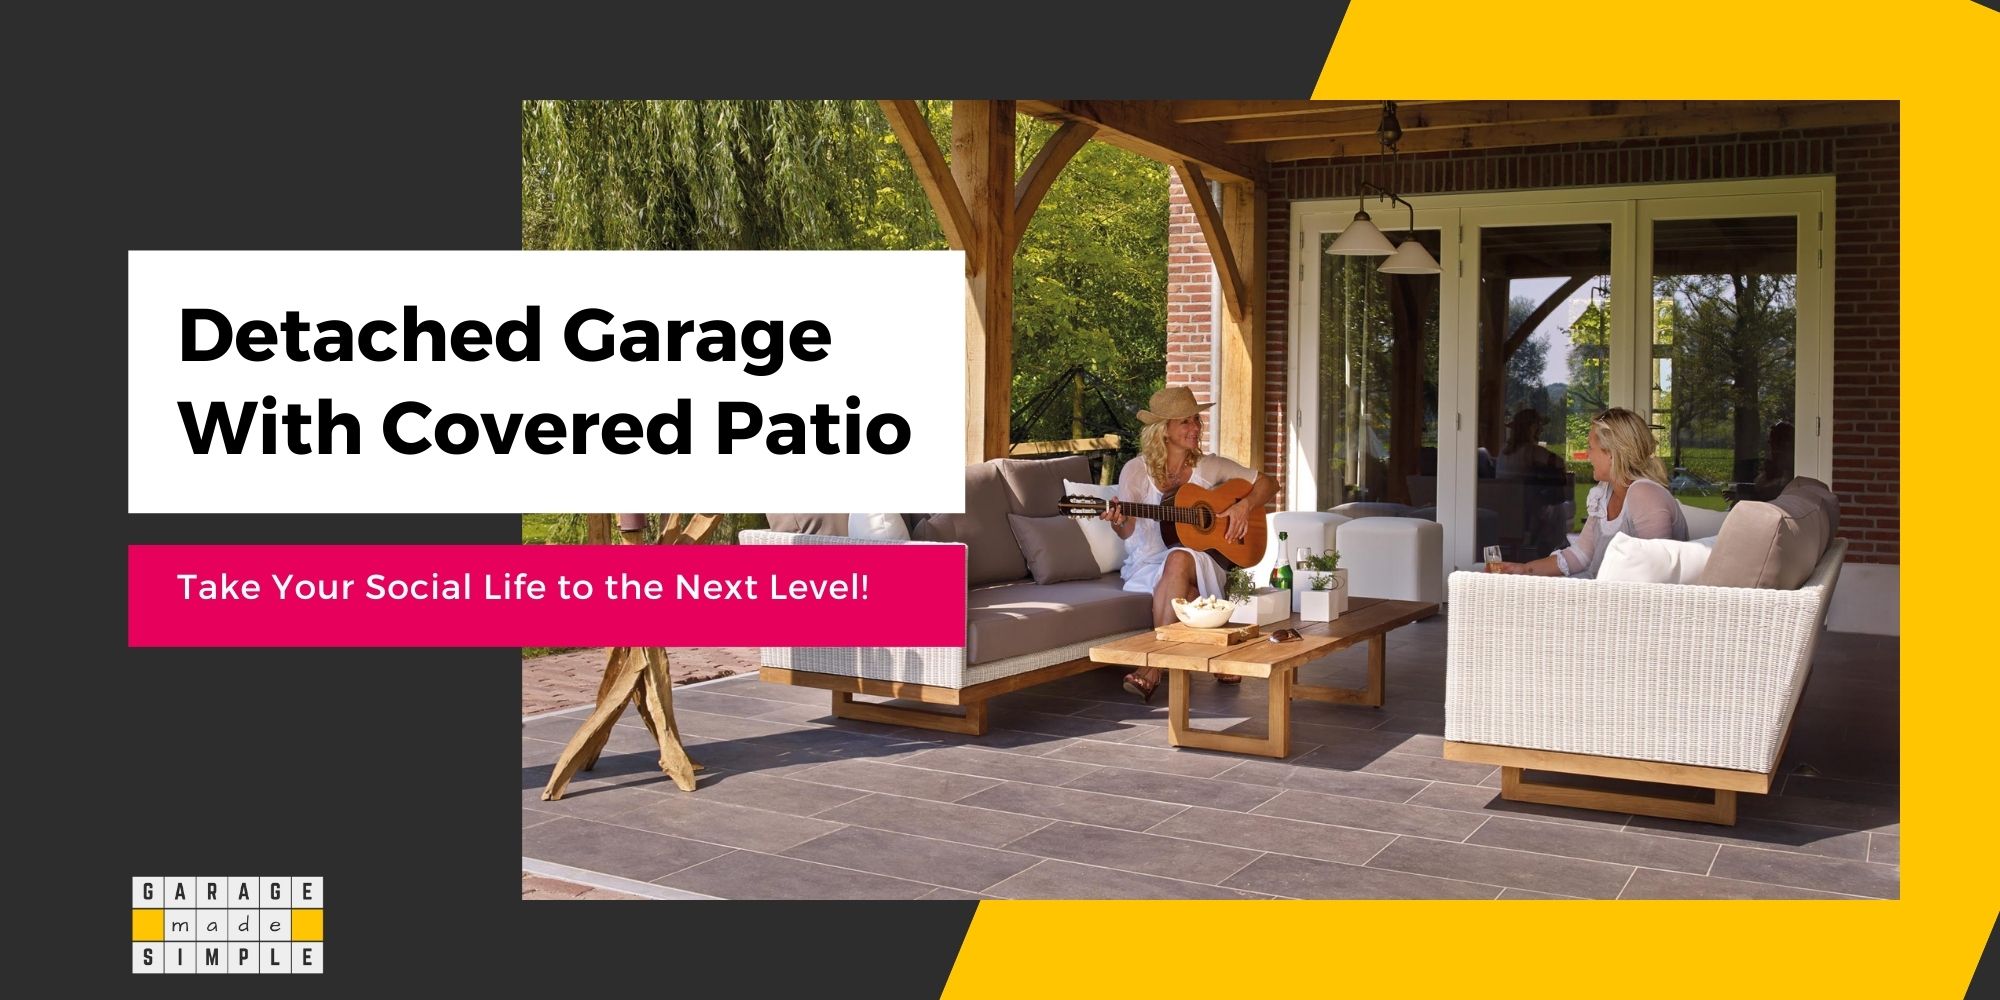 Detached Garage With Covered Patio? Results In Better Social Life (& More!)